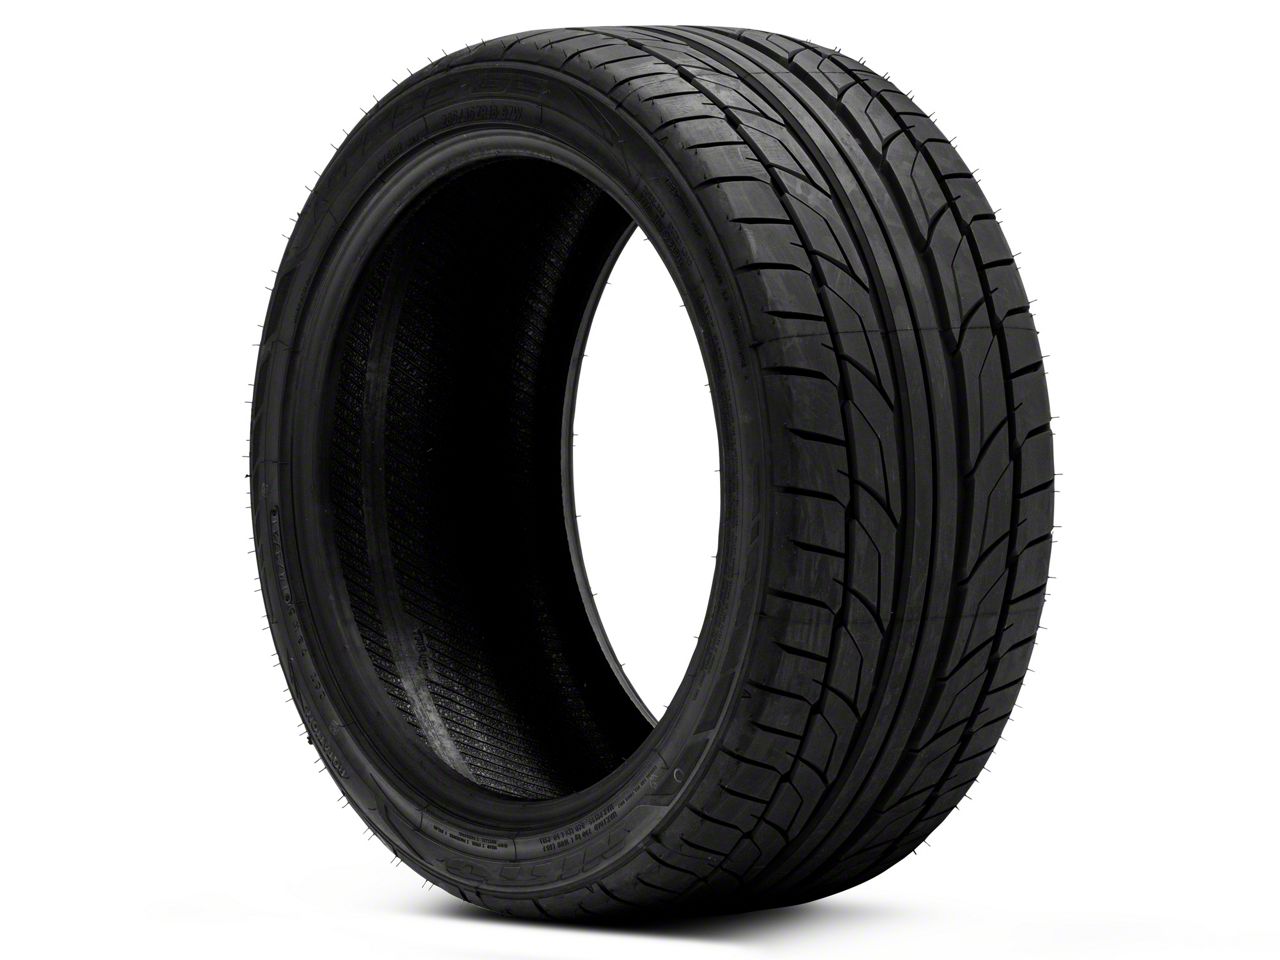 NITTO Challenger NT555 G2 Ultra High Performance Tire 211100 (275 